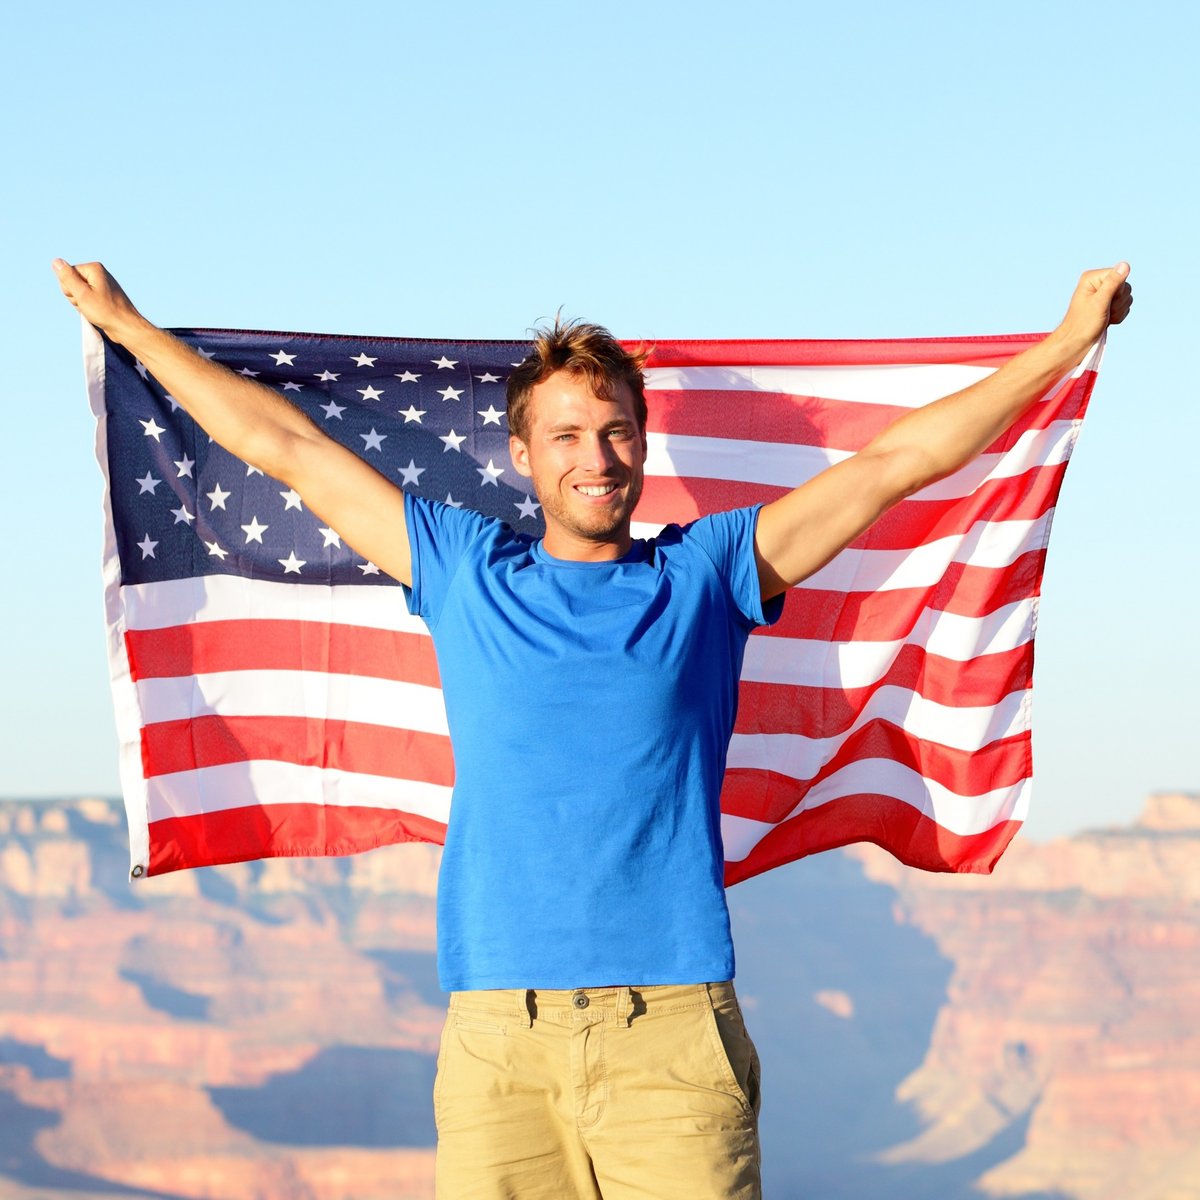 Live the American dream as an Au Pair in the USA